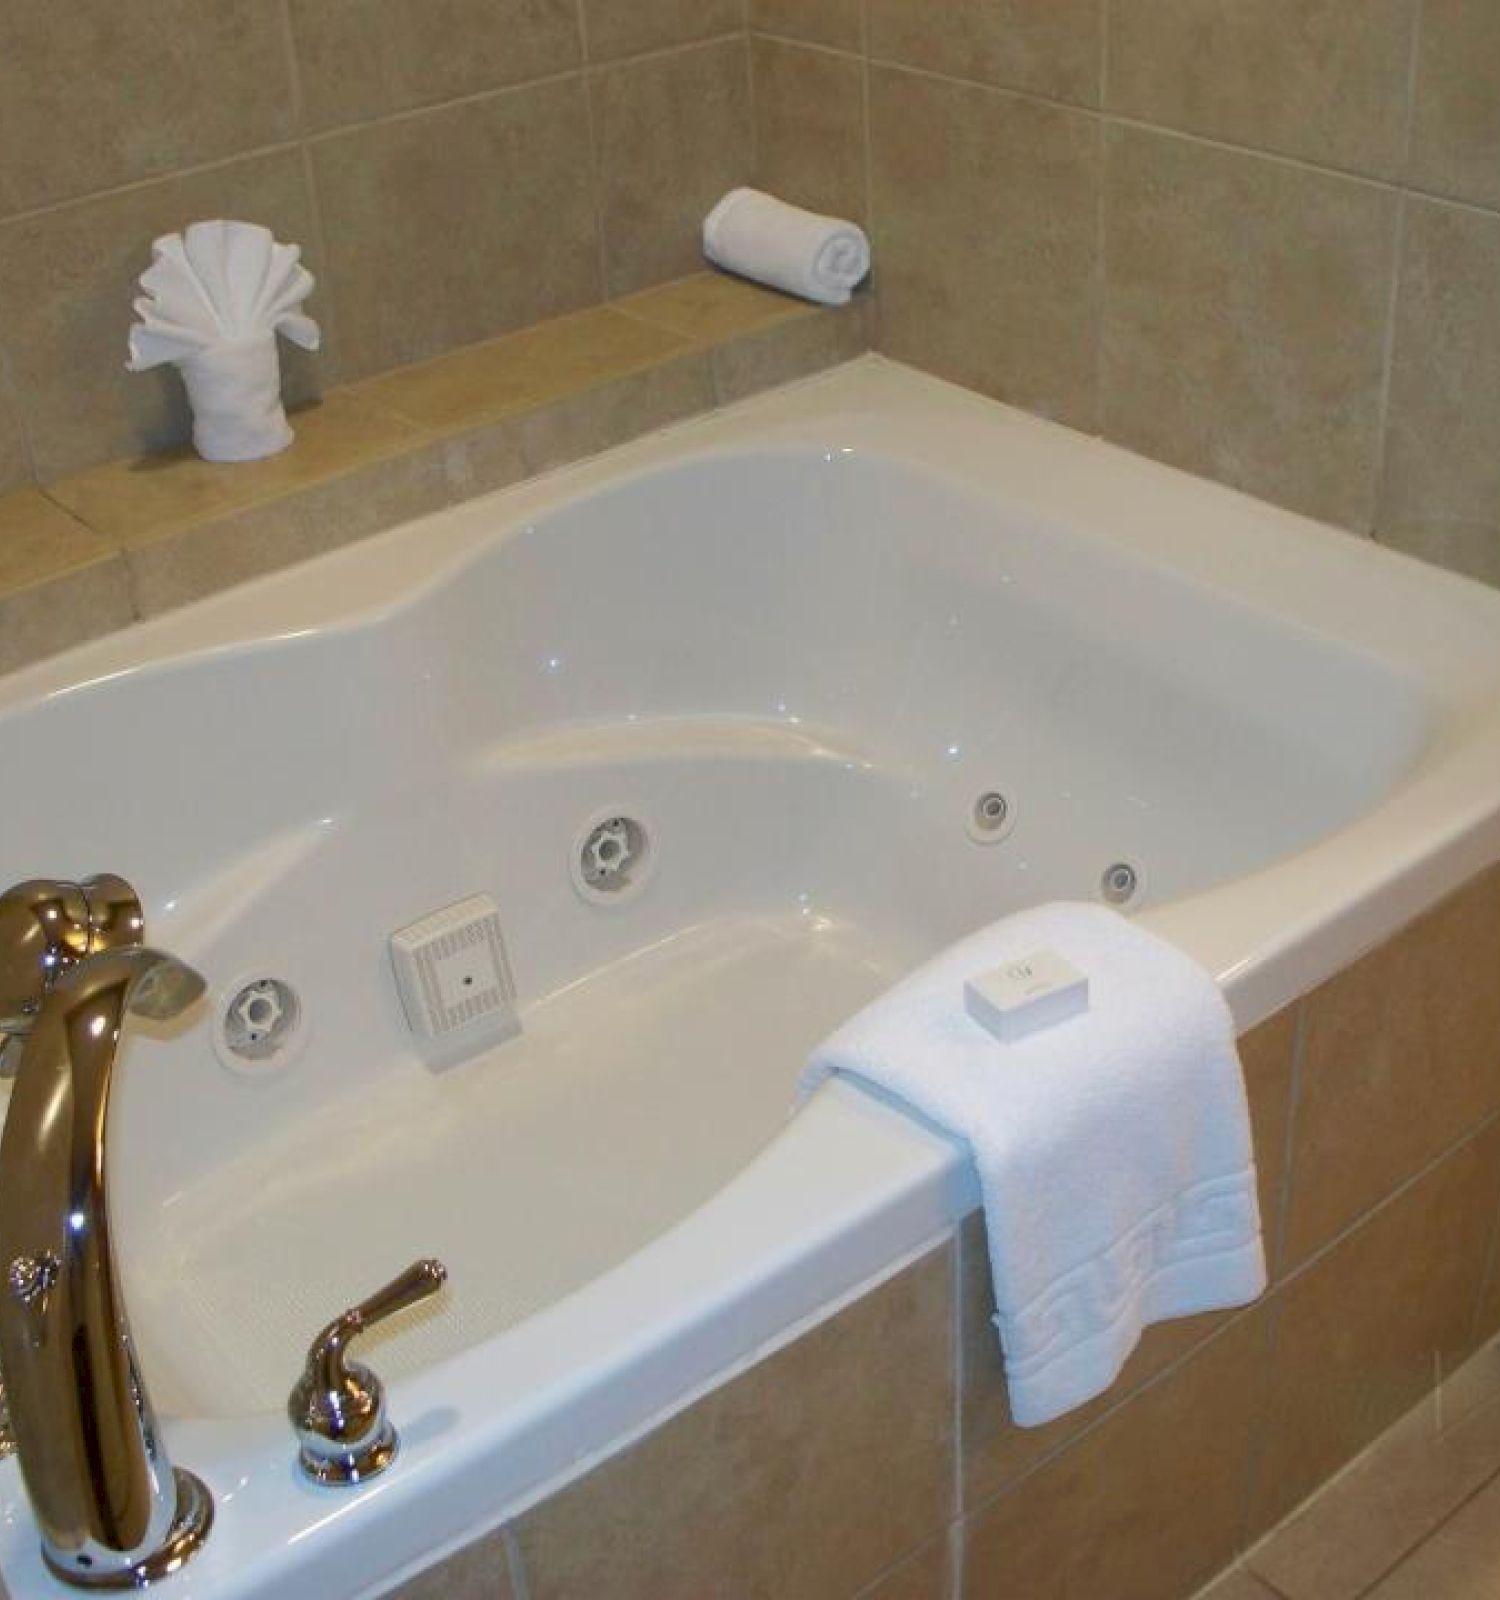 A bathroom with a jetted bathtub, folded towel, bar of soap, and a roll of toilet paper. The tub has golden faucets.